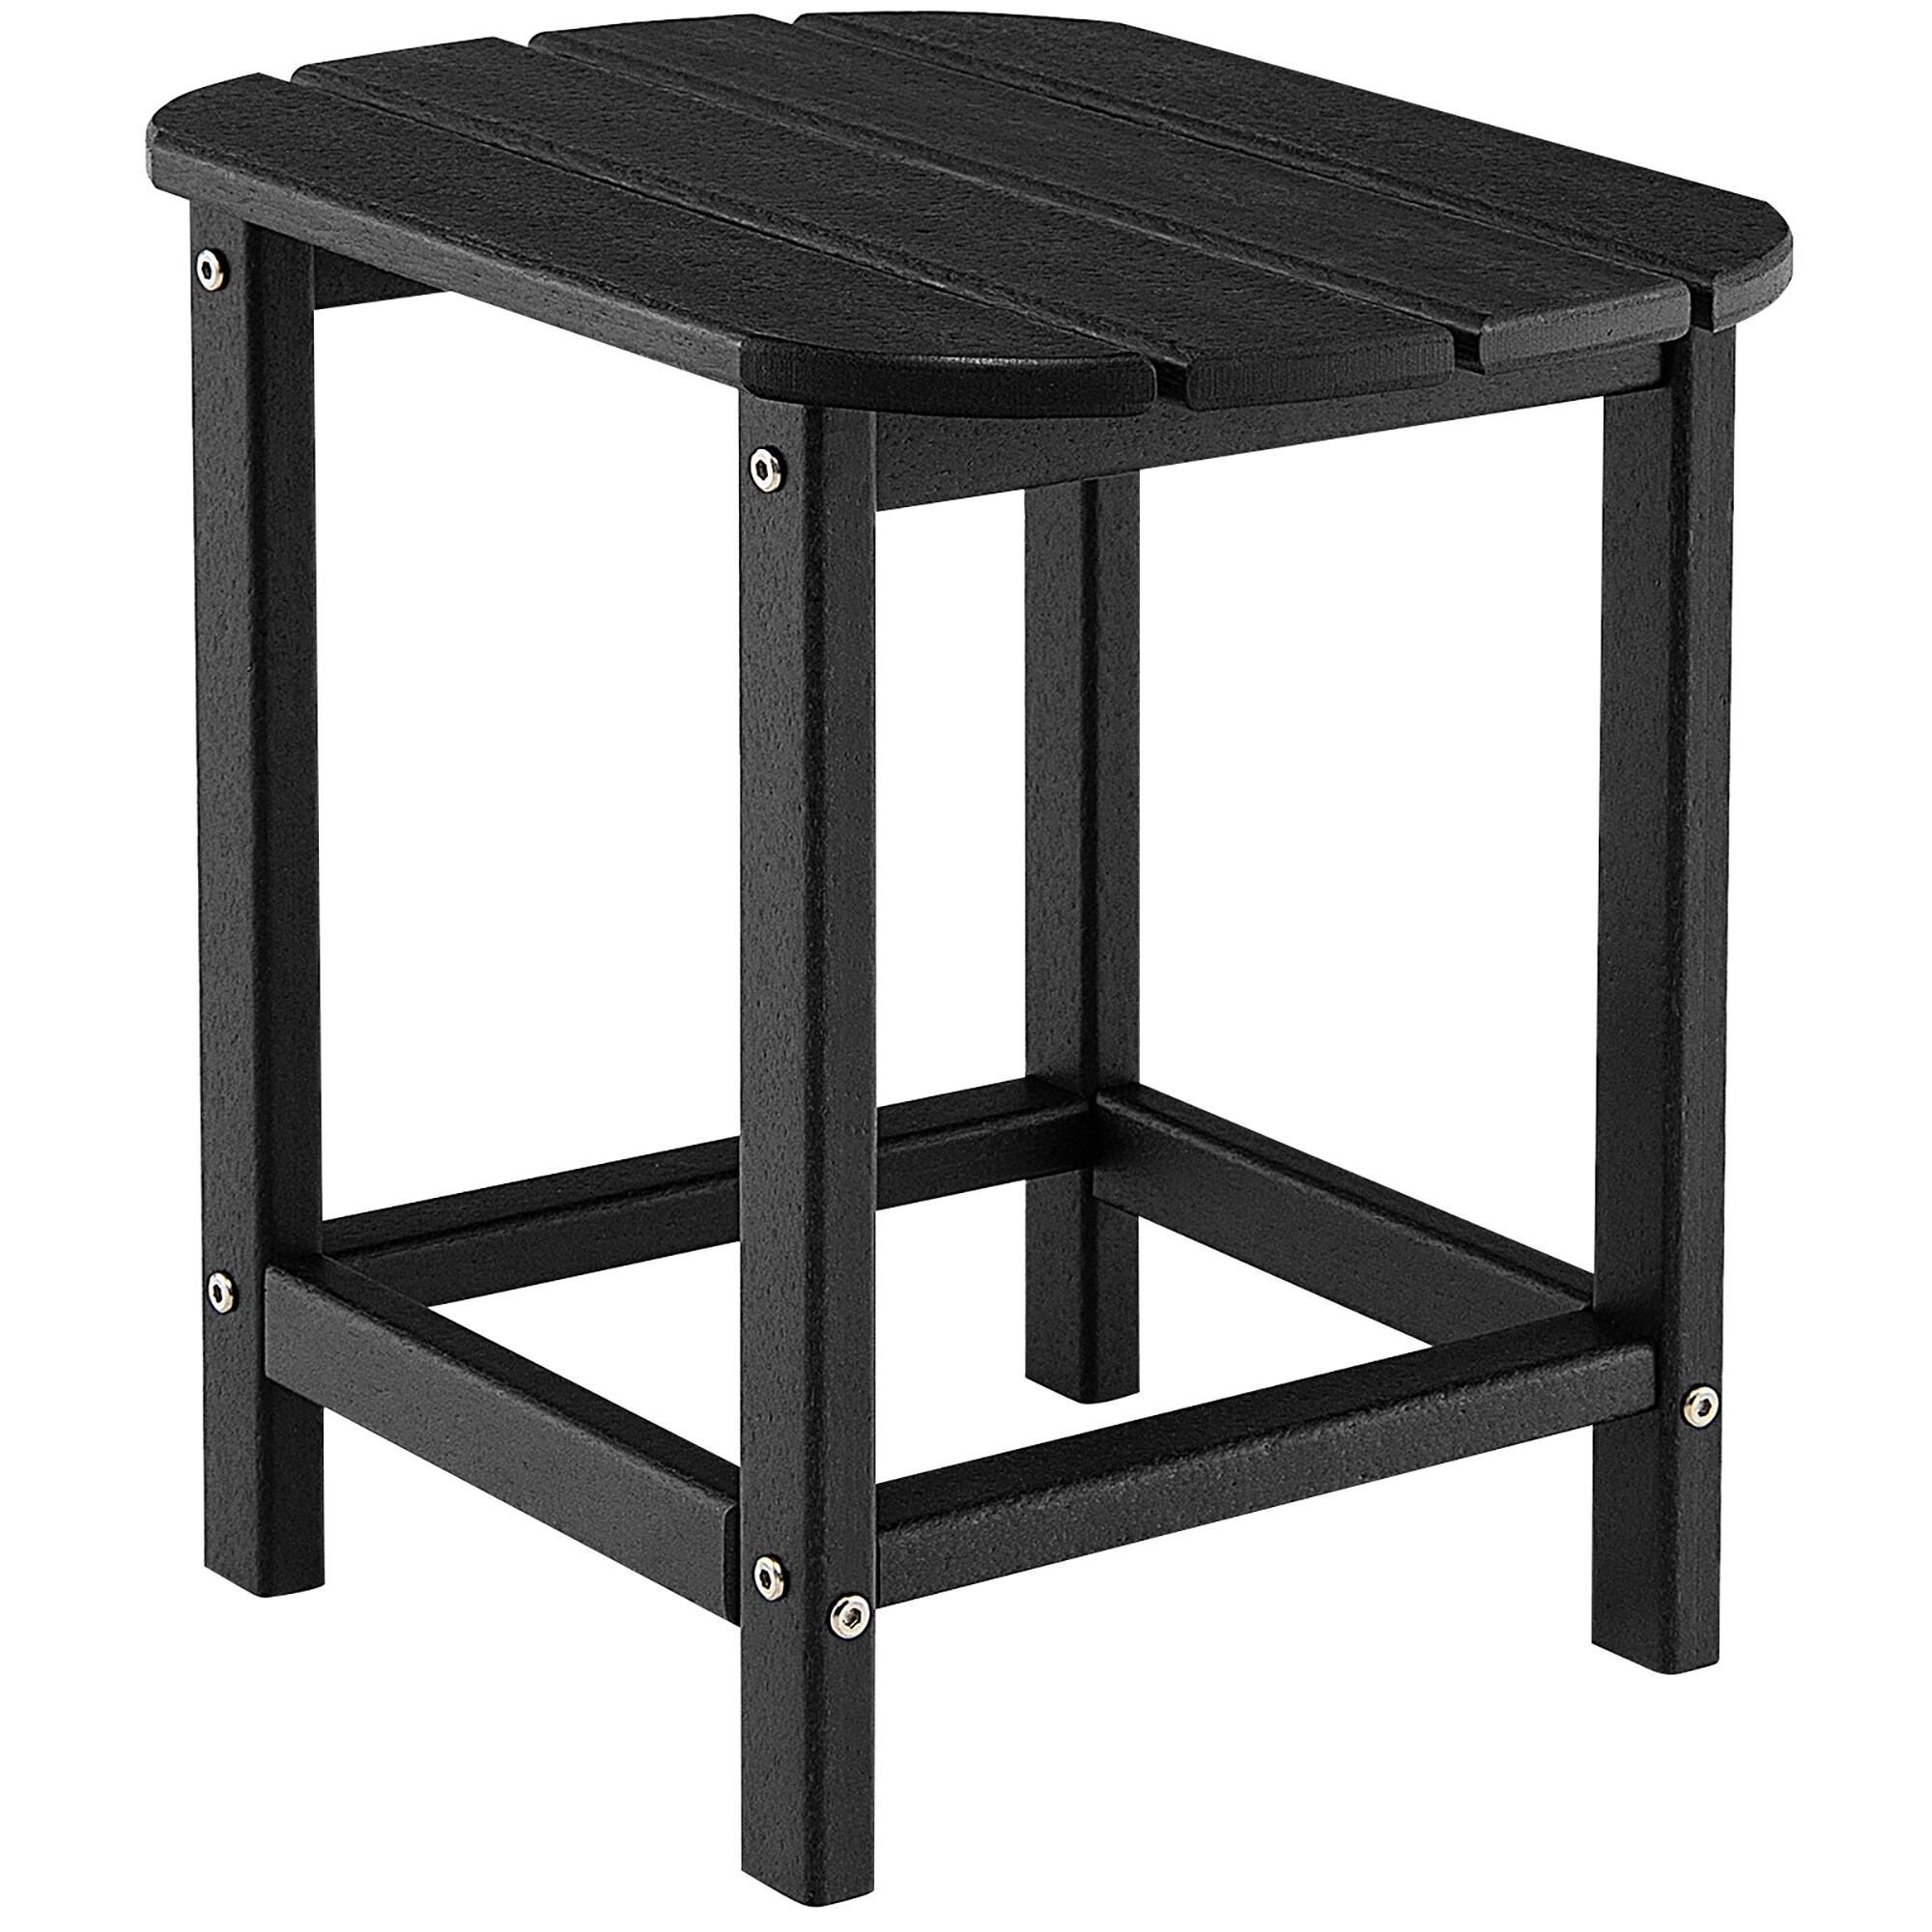 Costway 18'' Patio Adirondack Side Table Weather Resistant HDPE Garden - 19'' x 14.5'' x 18''